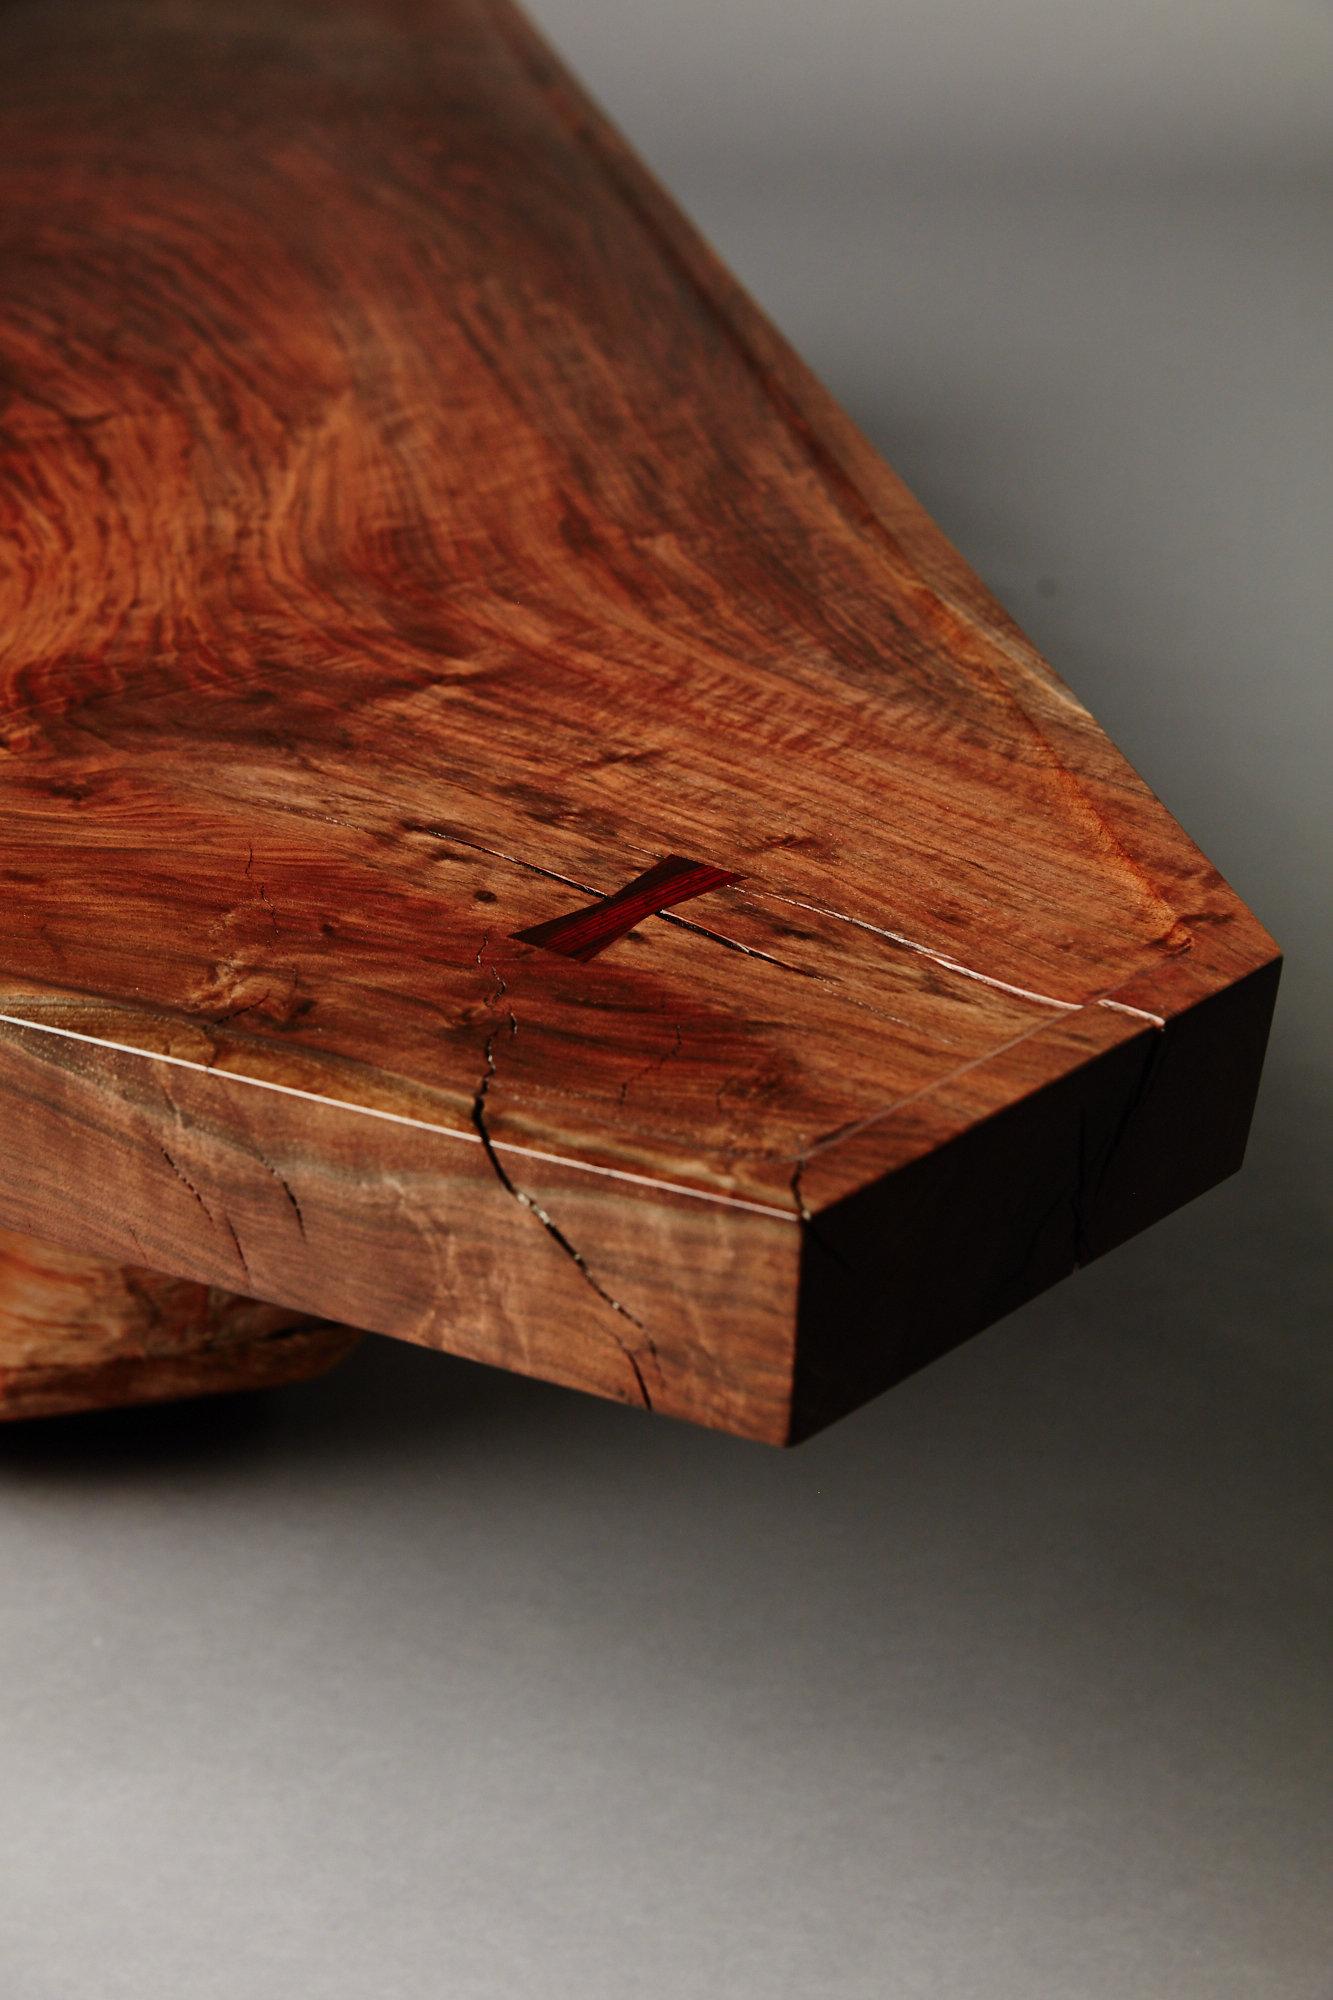 Sculptural coffee table featuring a single slab claro walnut top and a hand-shaped old growth redwood base.